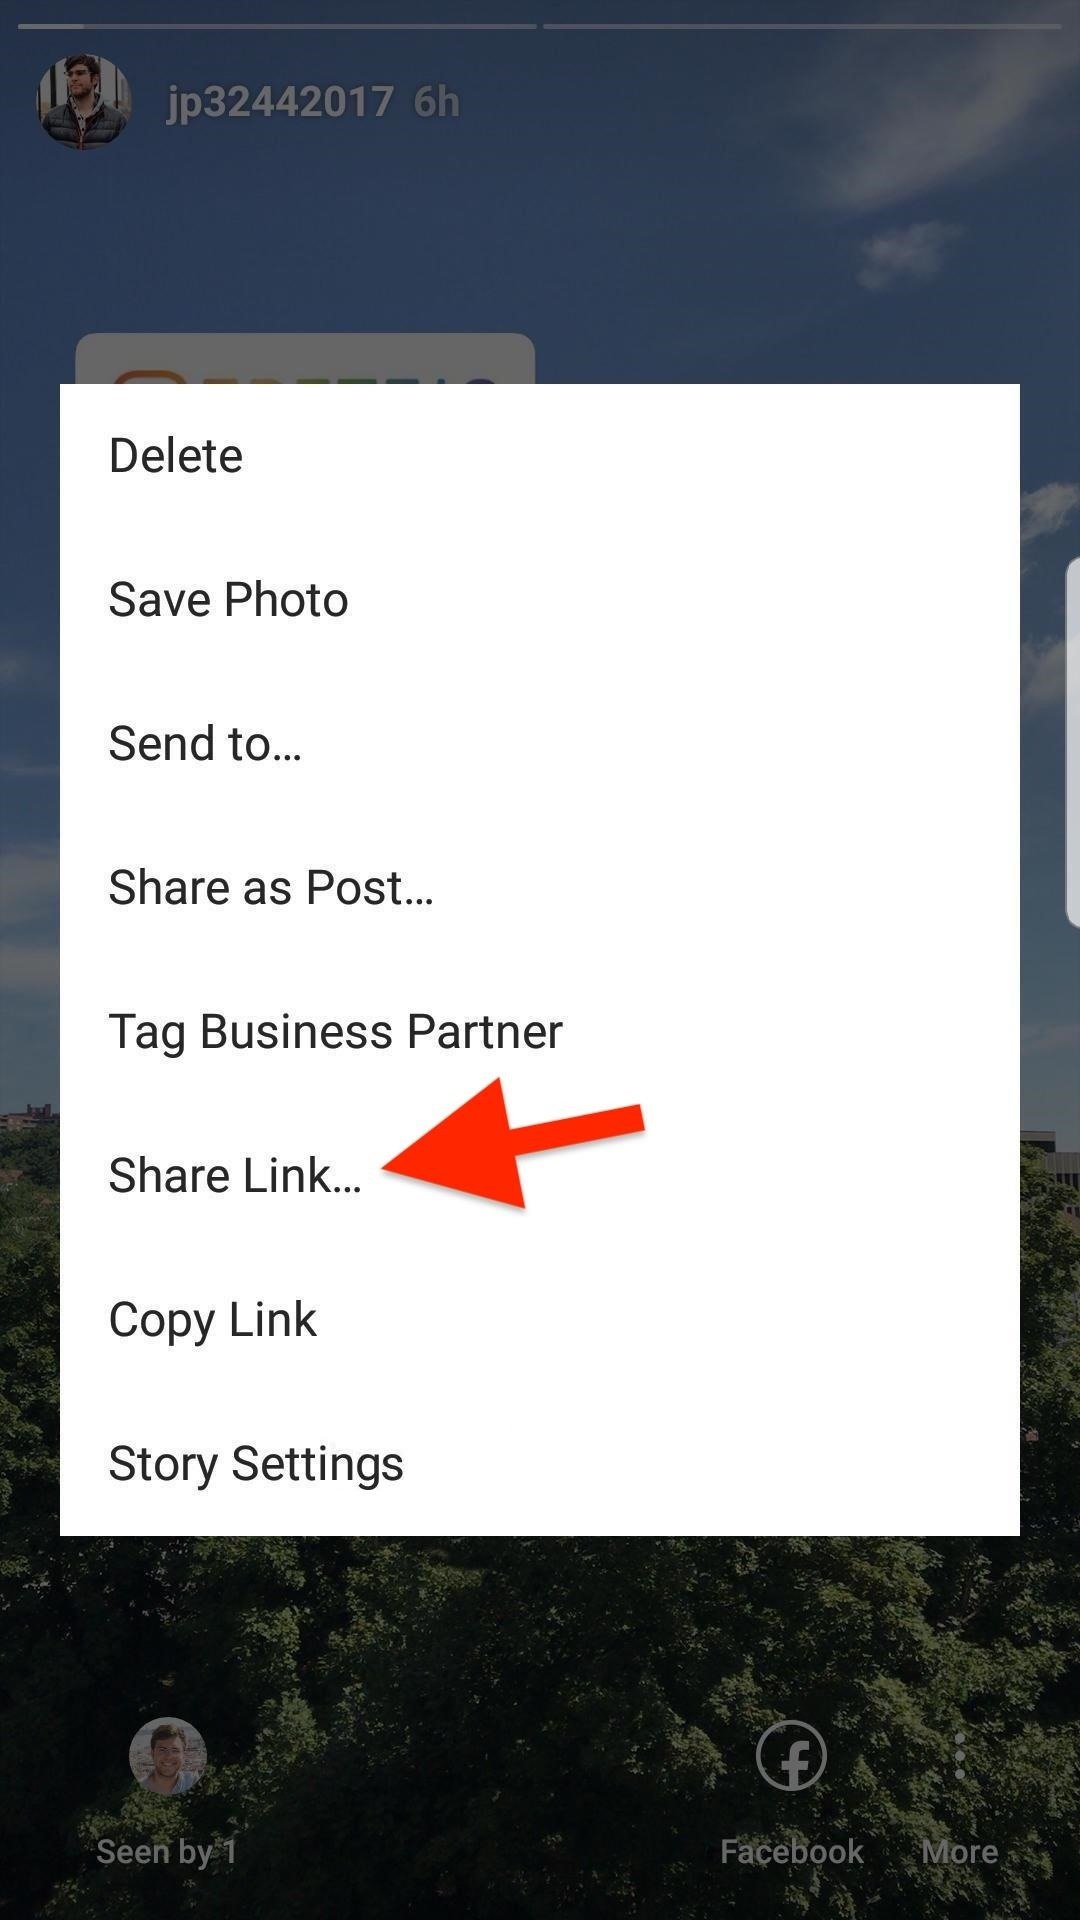 How to Copy & Share a Link to Your Instagram Story That You Can